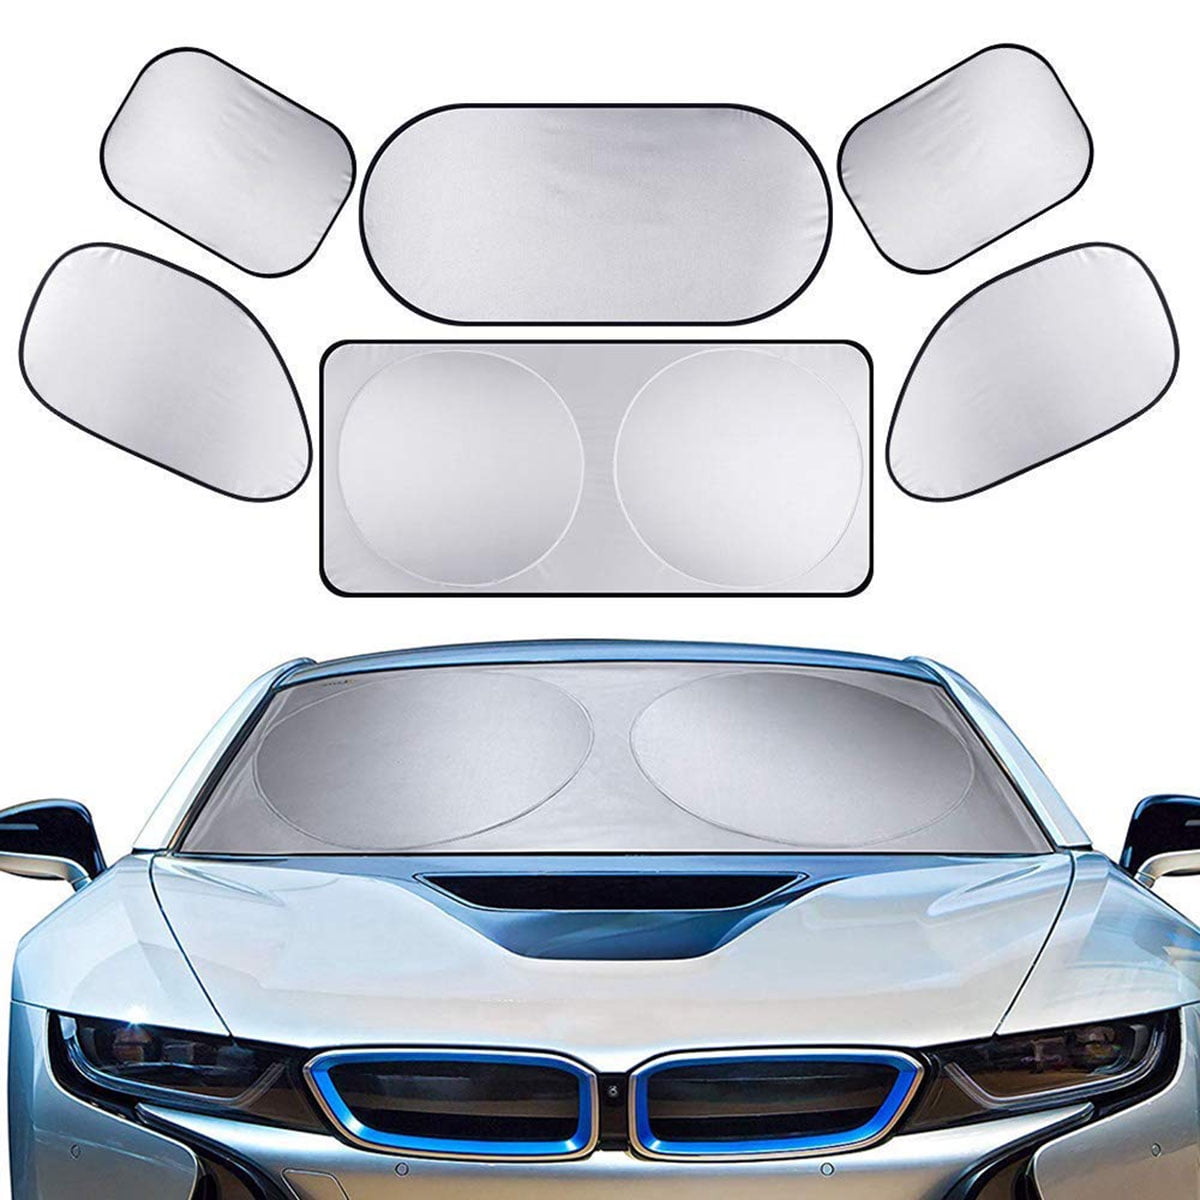 Keeps Vehicle Cool Block UV Protection Foldable Reflective Coating Side Front Rear Window Reflective Shade for All Cars SUV Truck 6Pcs/Set Full Car Windshield Sun shade 